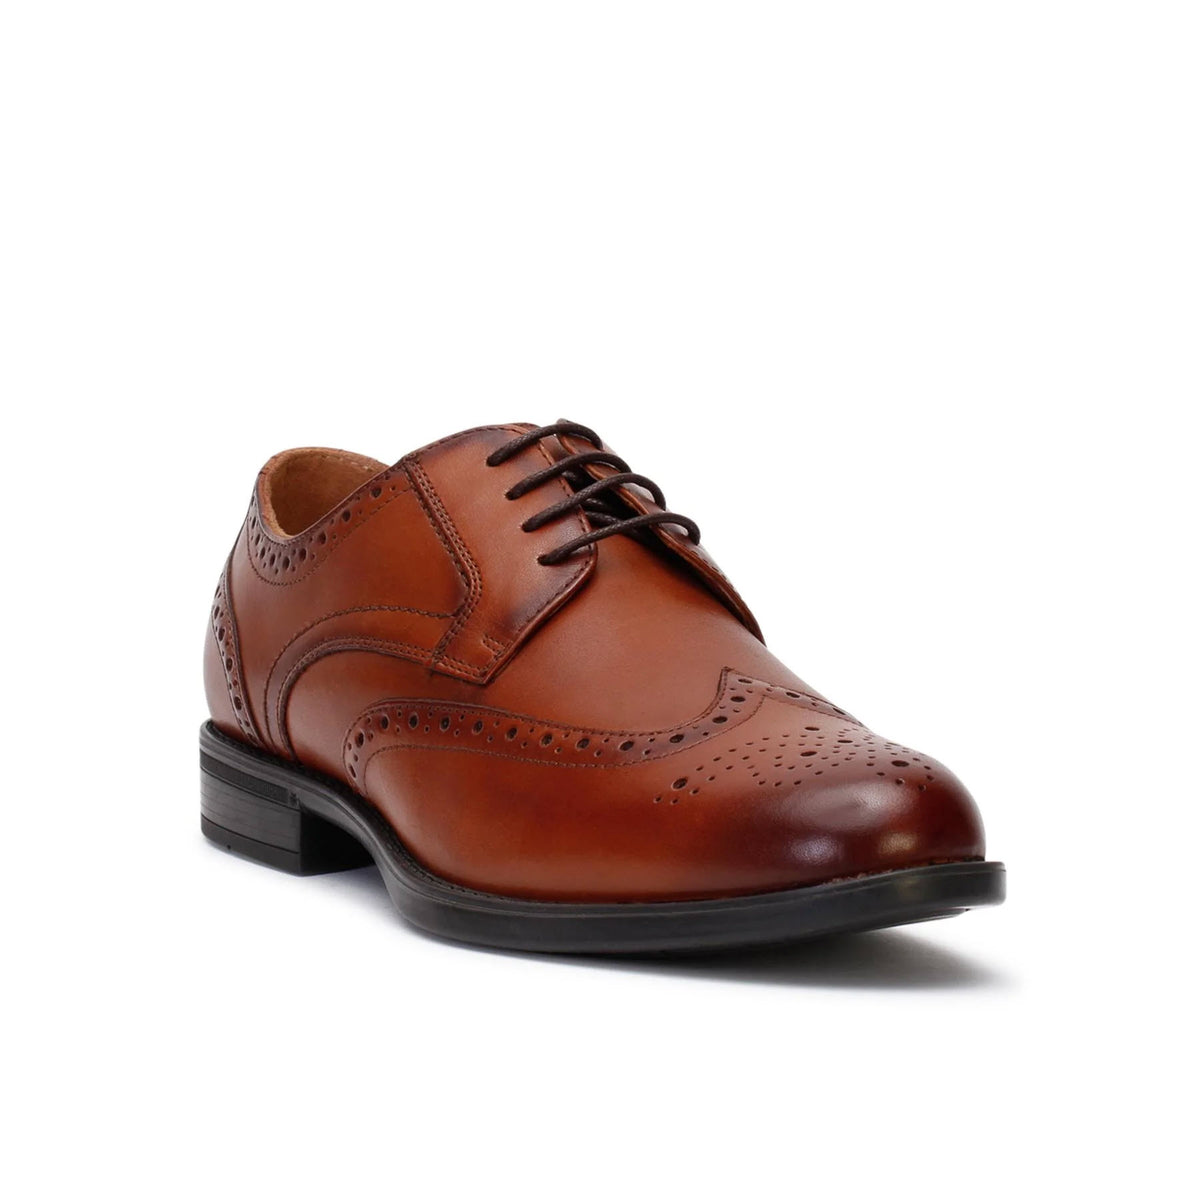 A single brown leather Florsheim Midtown Wingtip brogue shoe with decorative perforations, viewed from the side against a white background.